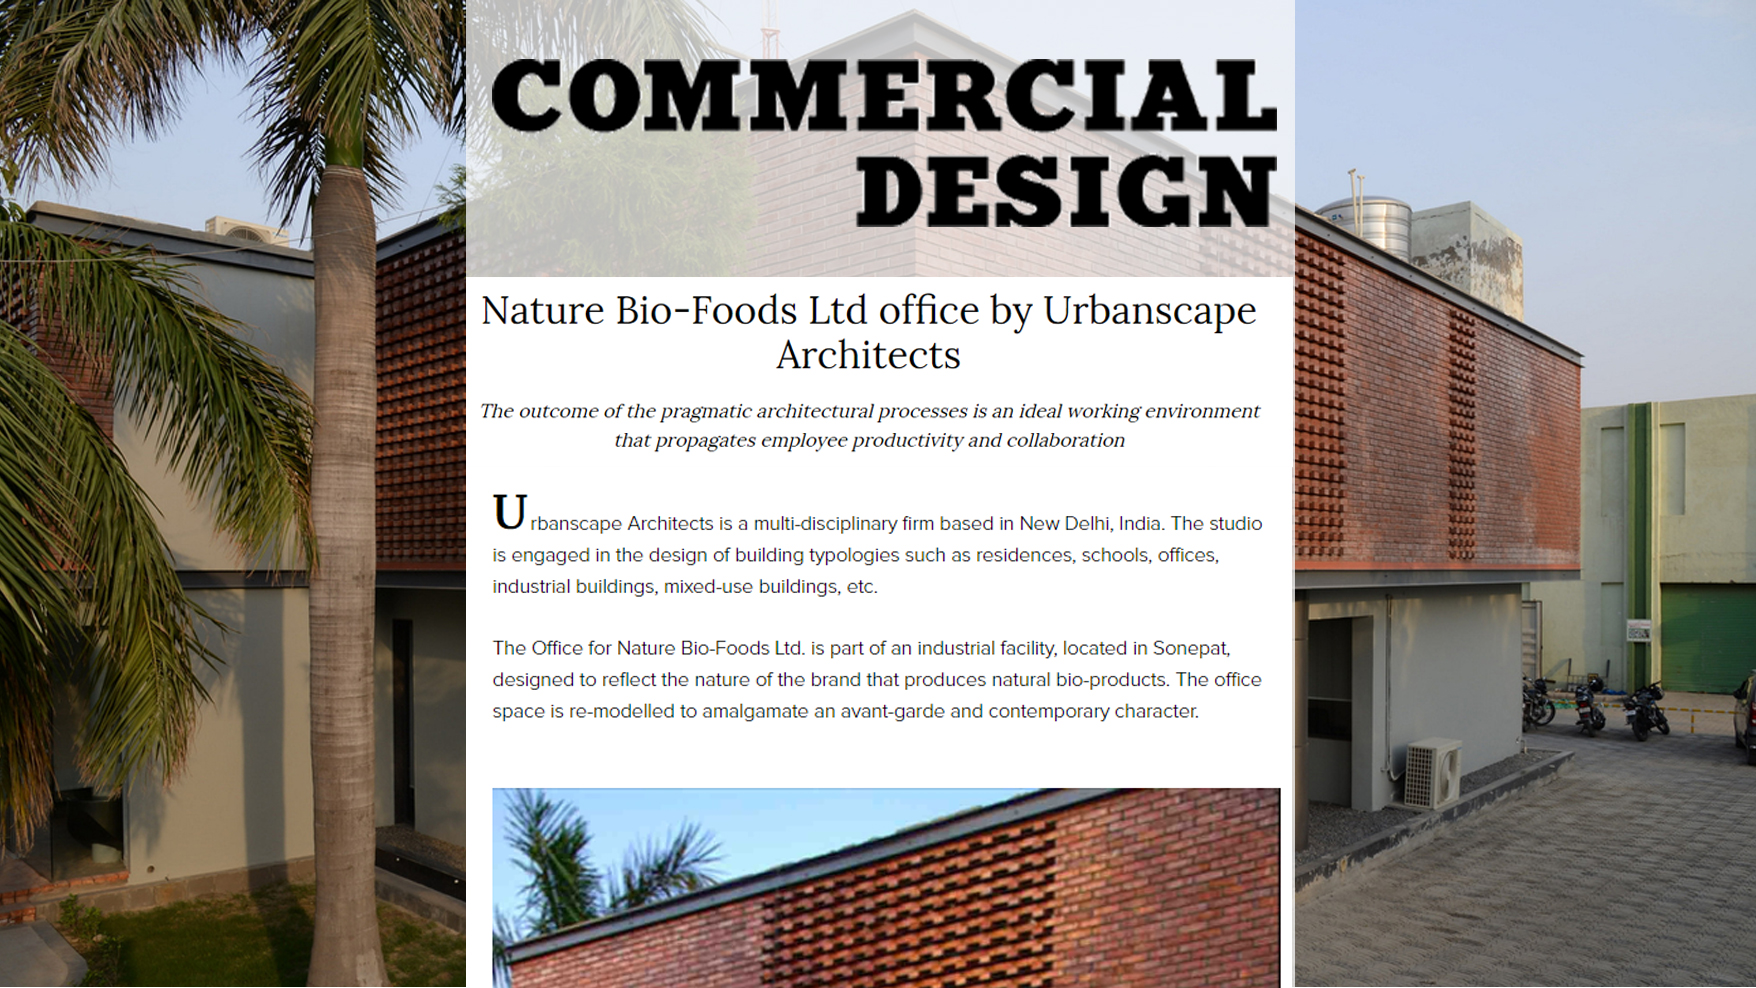 Commercial Design Magazine Covers Office for NBFL